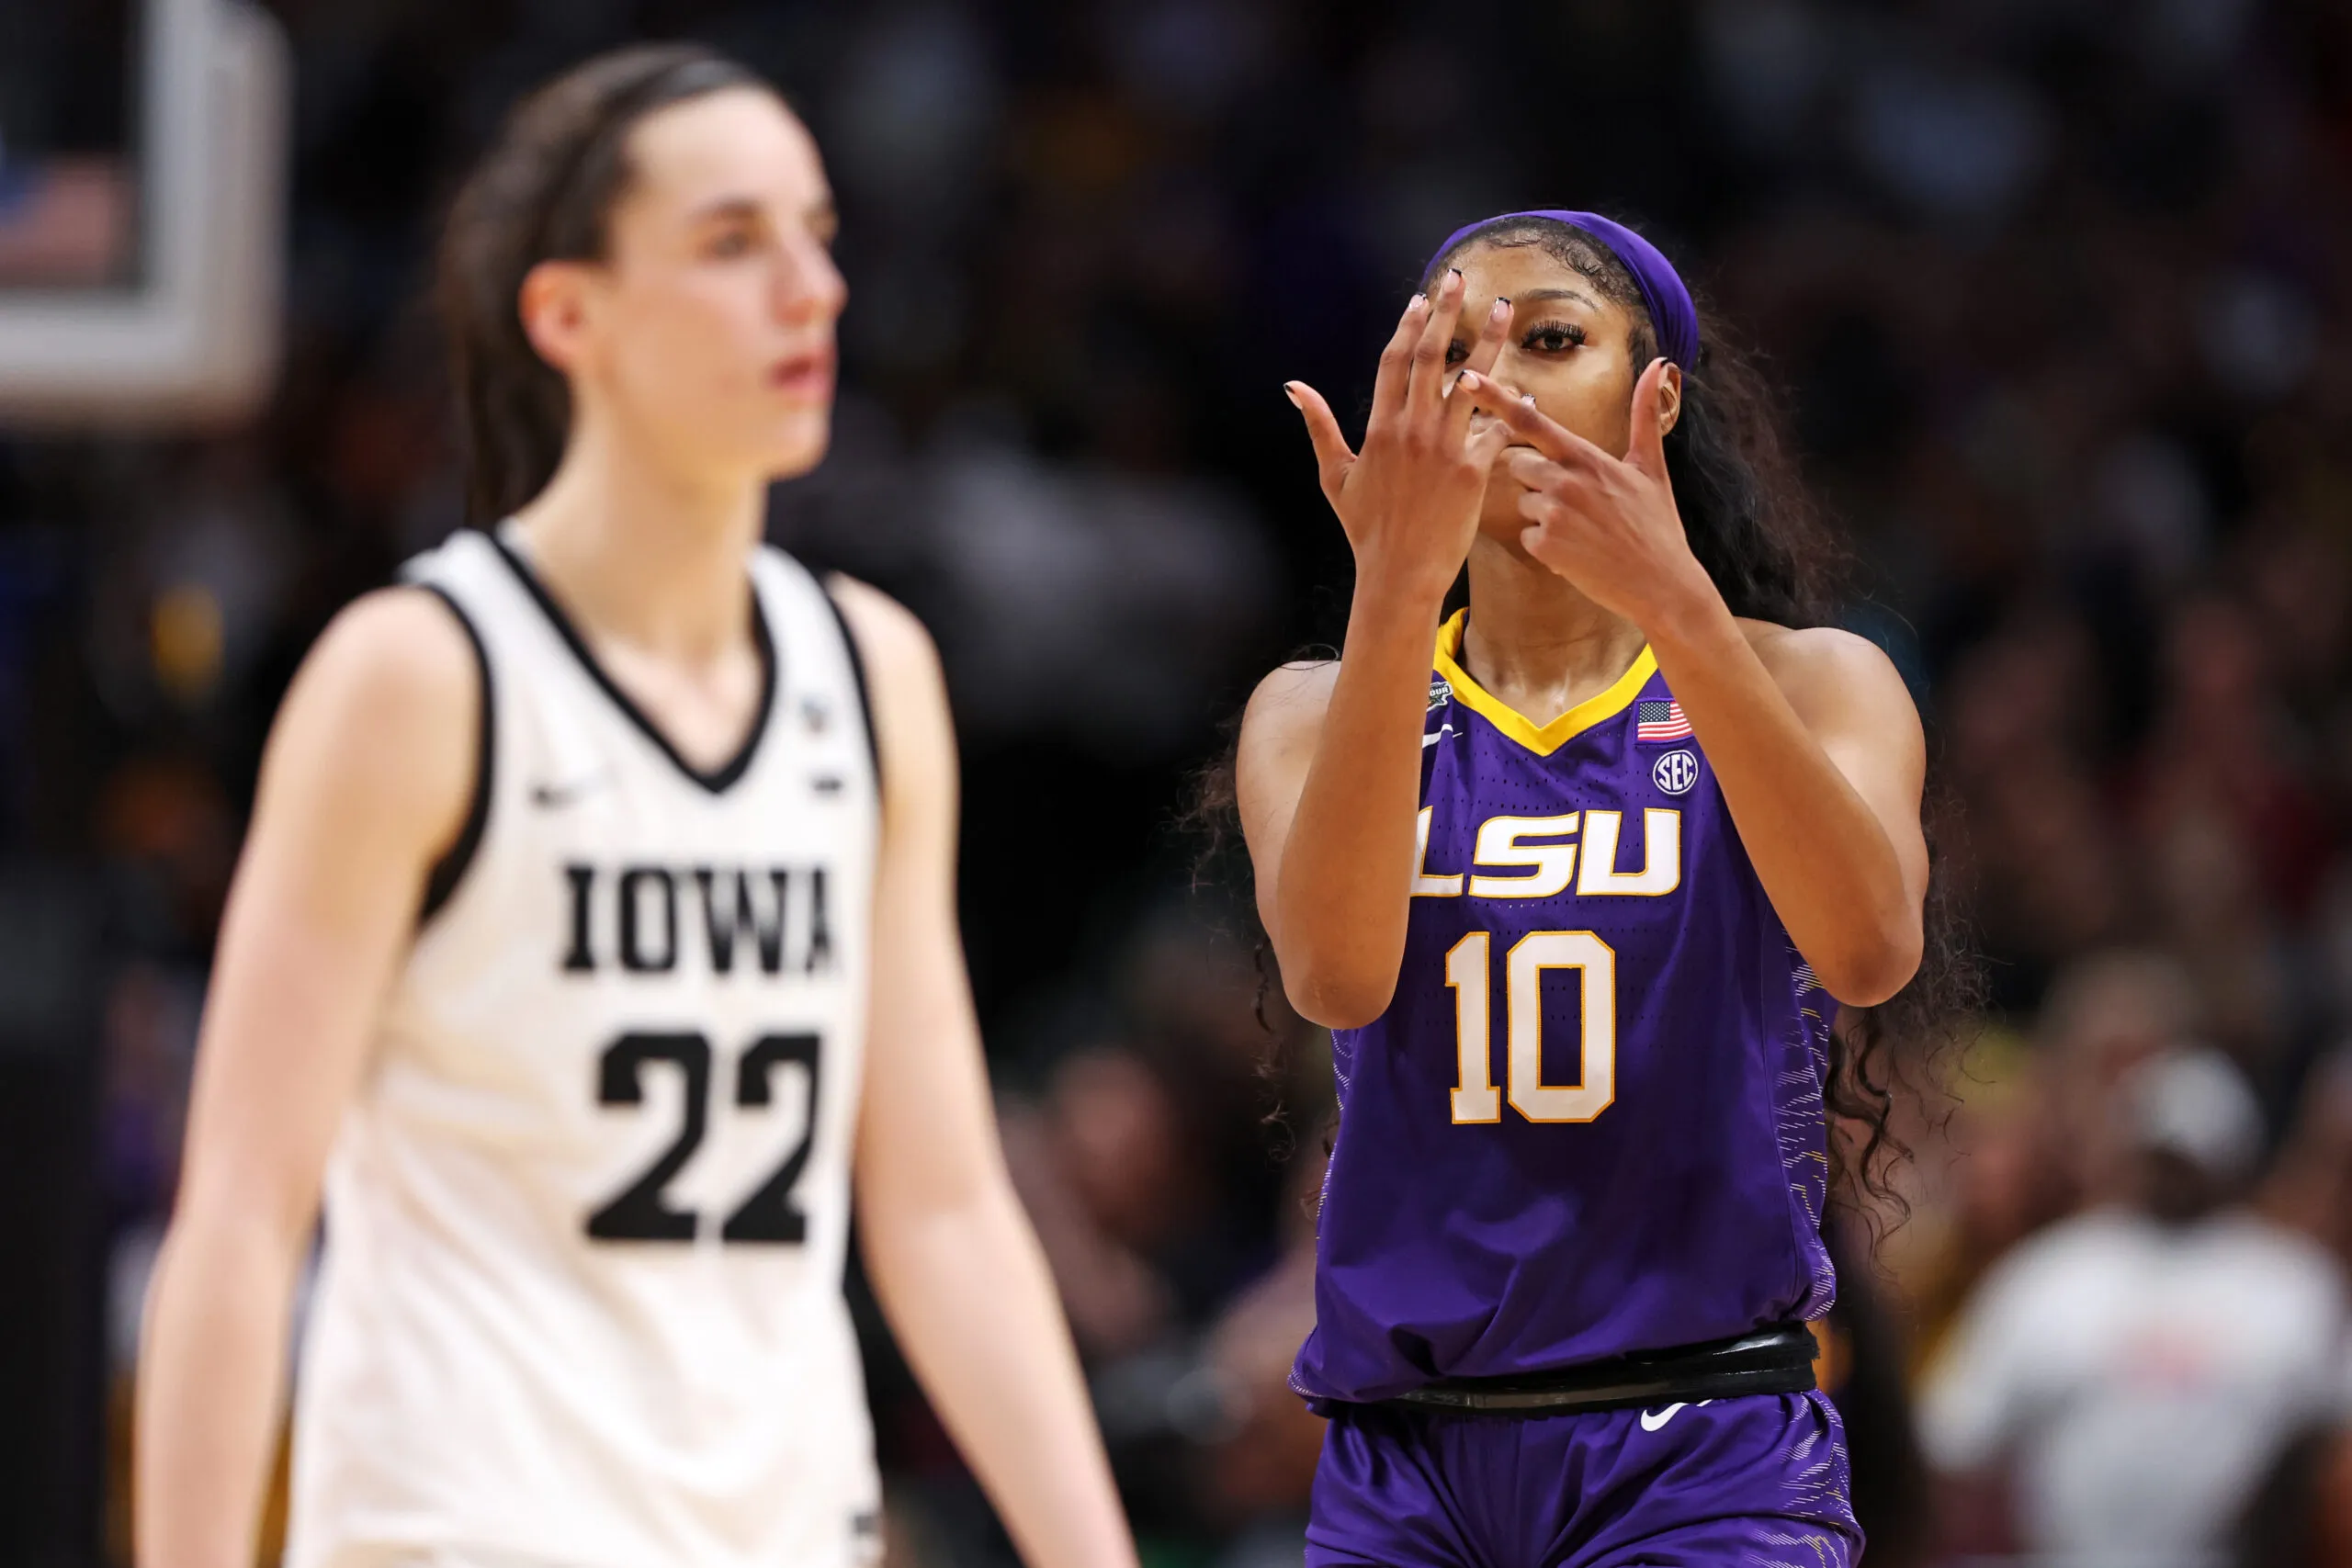 DALLAS, TEXAS - APRIL 02: Angel Reese #10 of the LSU Lady Tigers reacts towards Caitlin Clark #22 of the Iowa Hawkeyes during the fourth quarter during the 2023 NCAA Women's Basketball Tournament championship game at American Airlines Center on April 02, 2023 in Dallas, Texas. (Photo by Maddie Meyer/Getty Images)